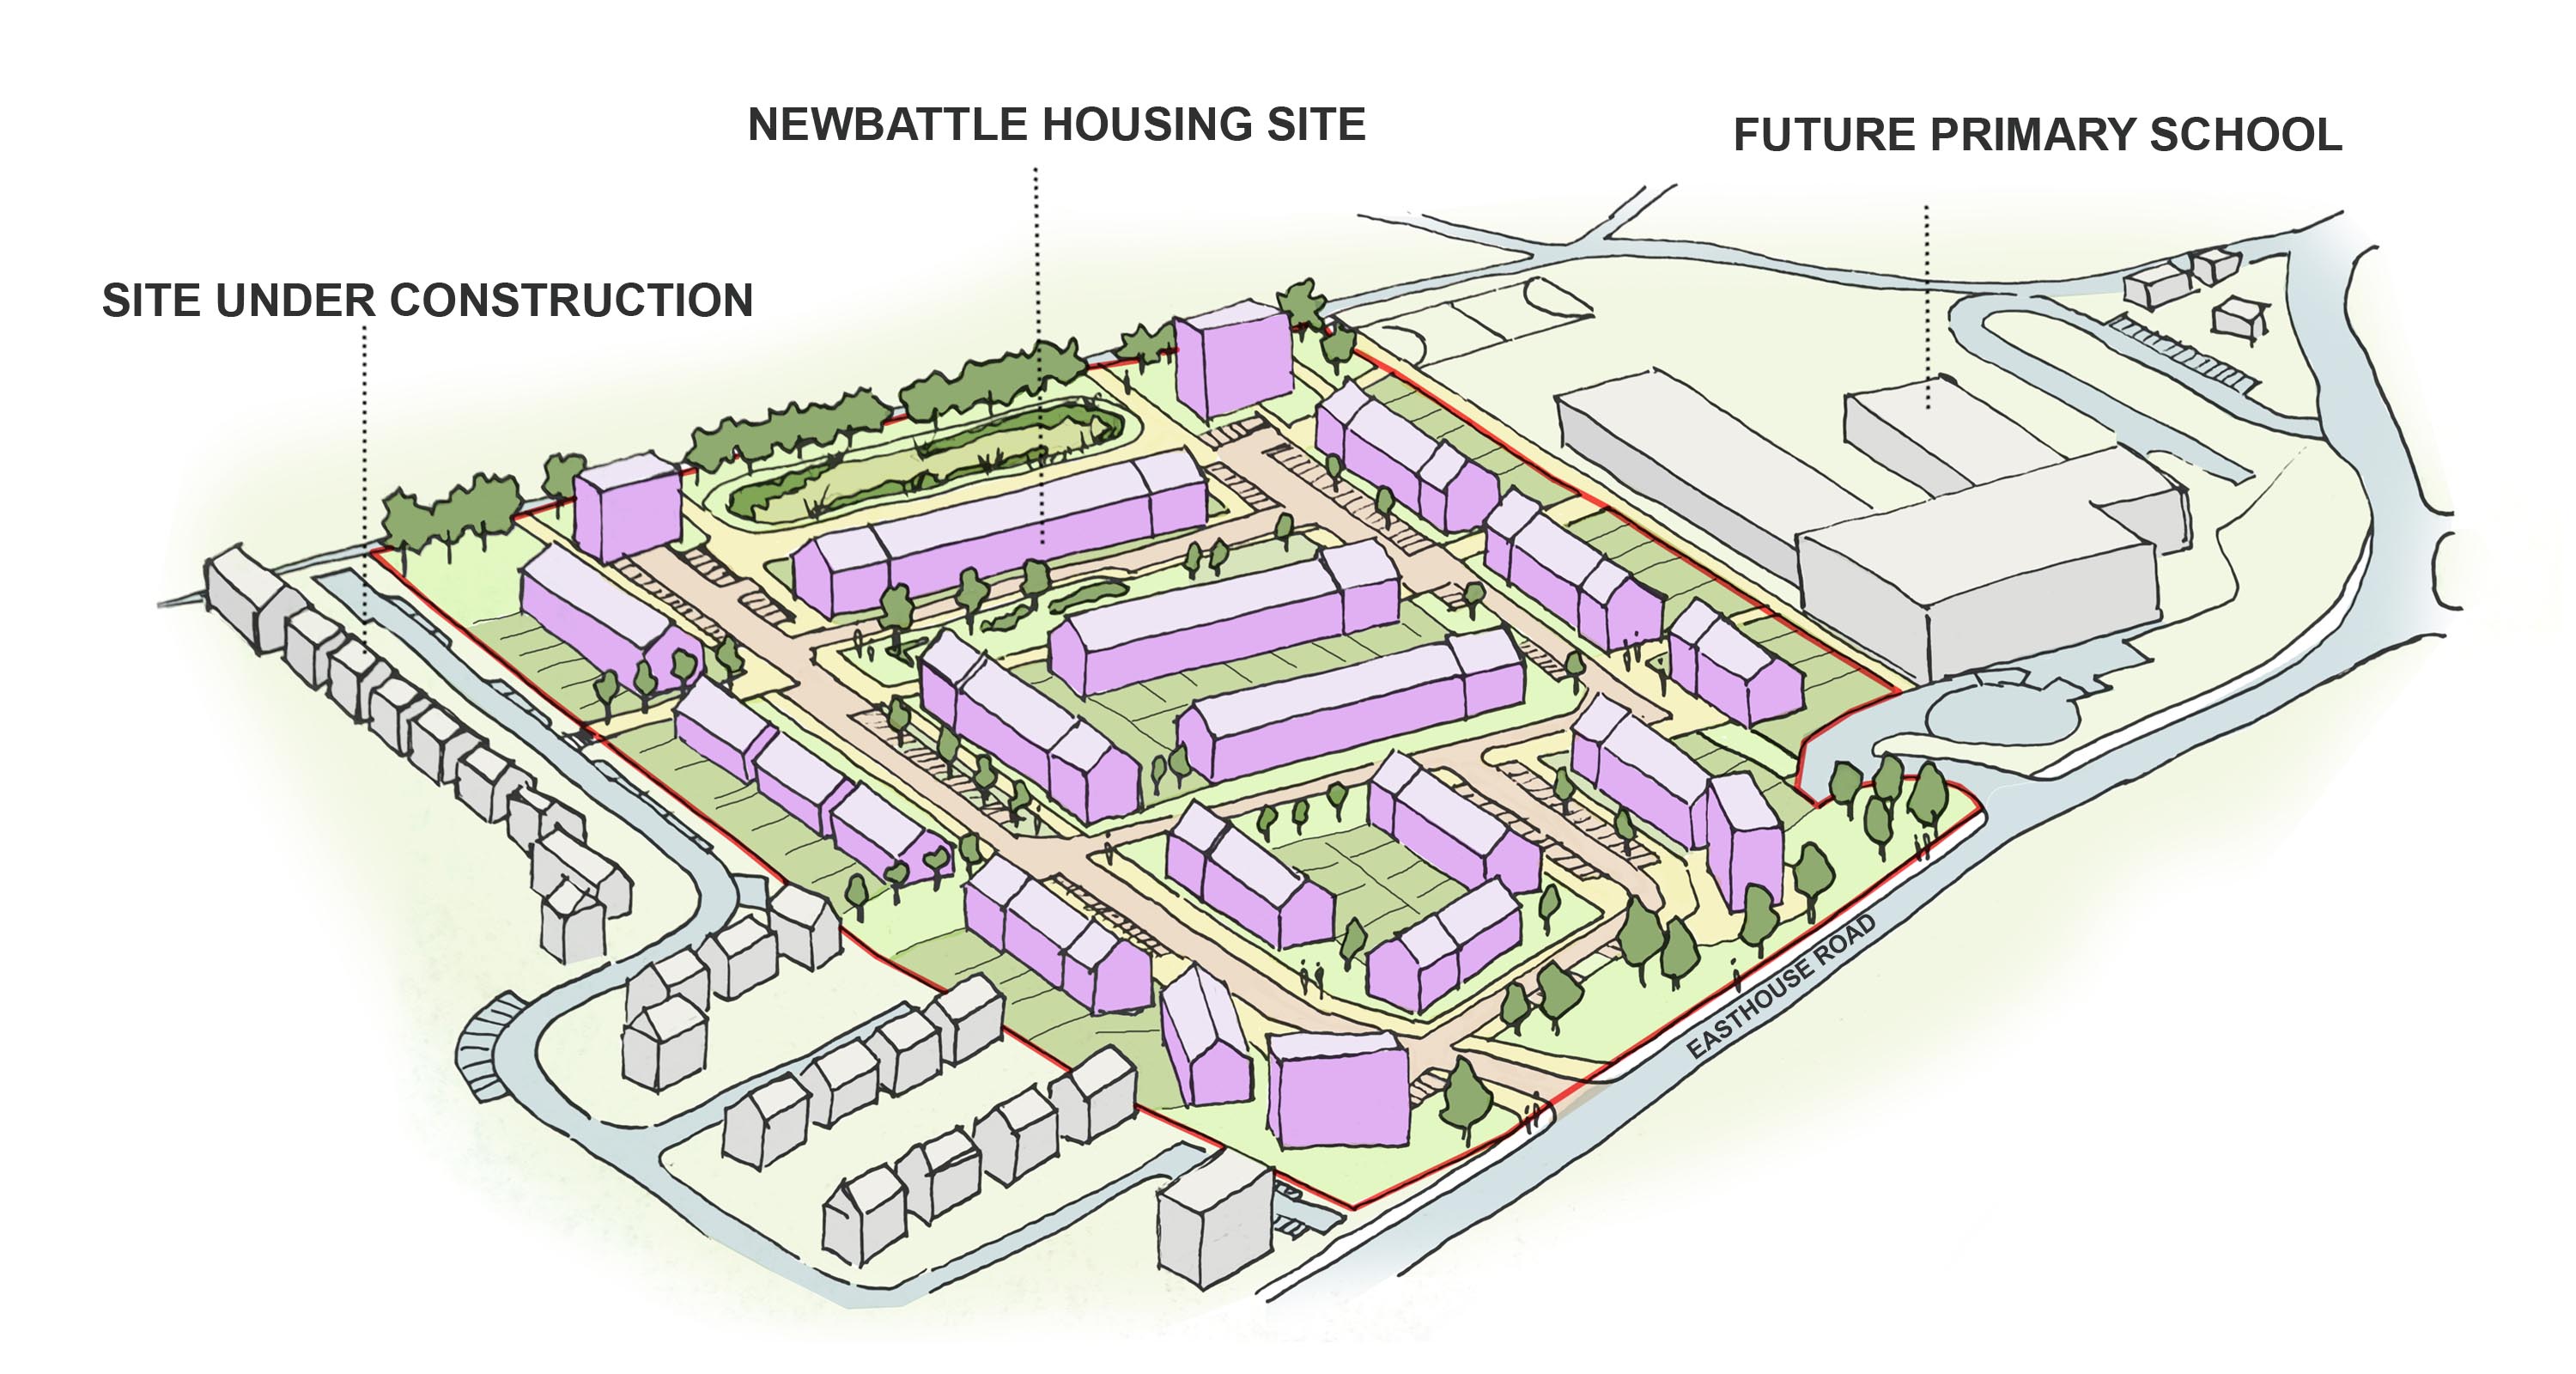 Consultation opens on proposed housing application at Newbattle